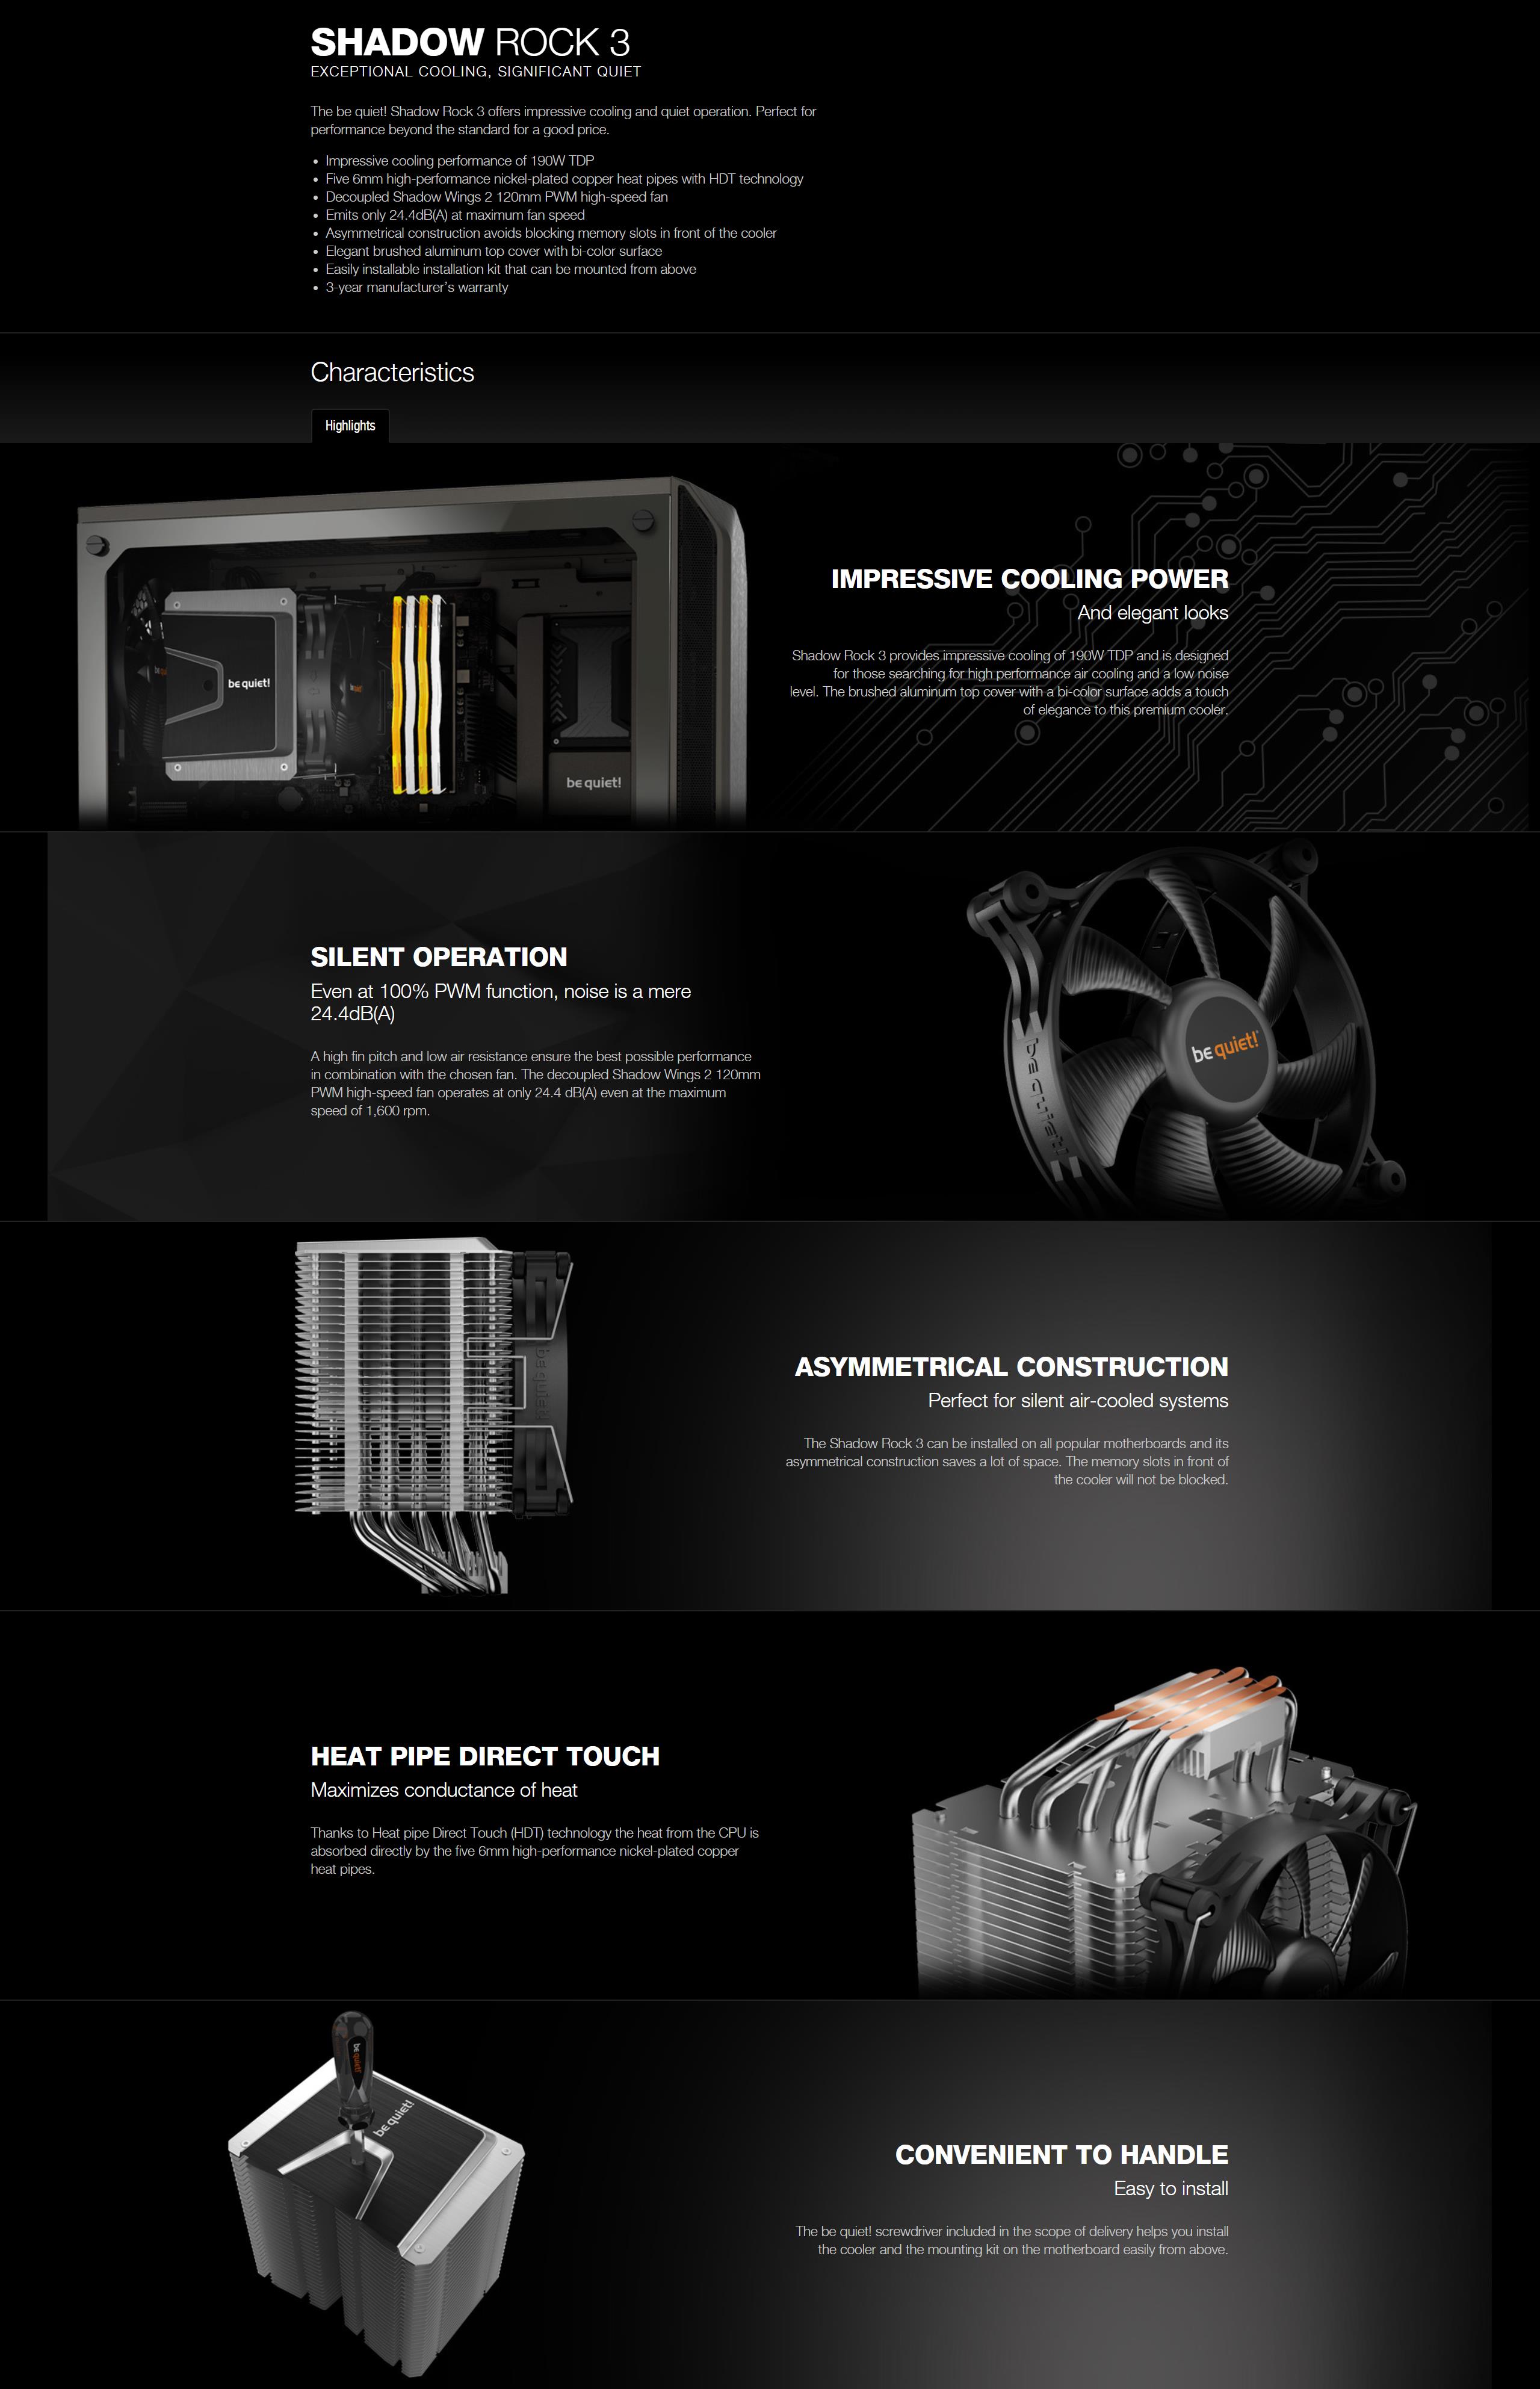 A large marketing image providing additional information about the product be quiet! Shadow Rock 3 CPU Cooler - Additional alt info not provided